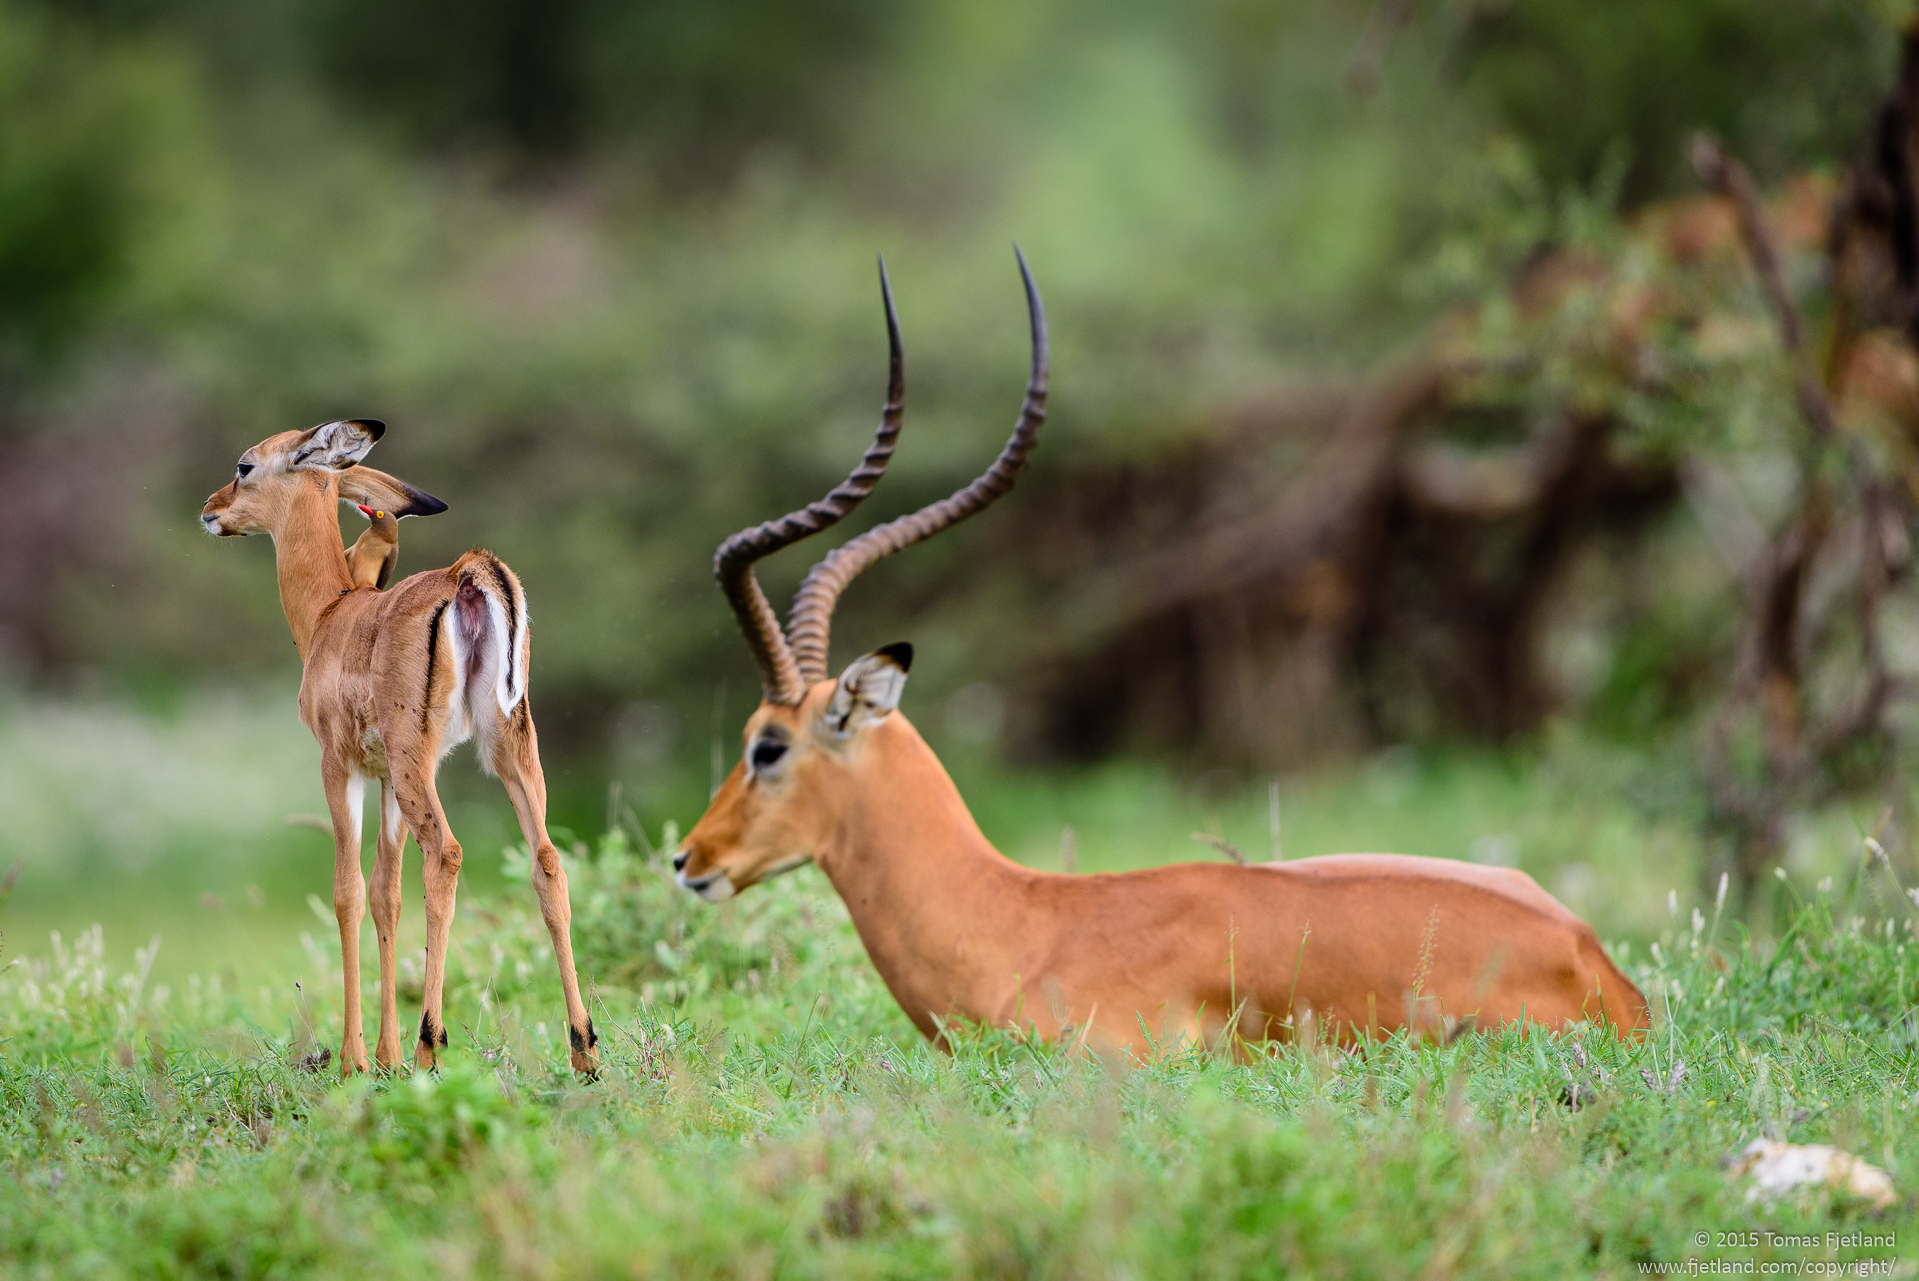 The Impala calf is obviously not used to being attended to by oxpeckers, but it seems the pests and parasites are still more uncomfortable than the cleaning bird